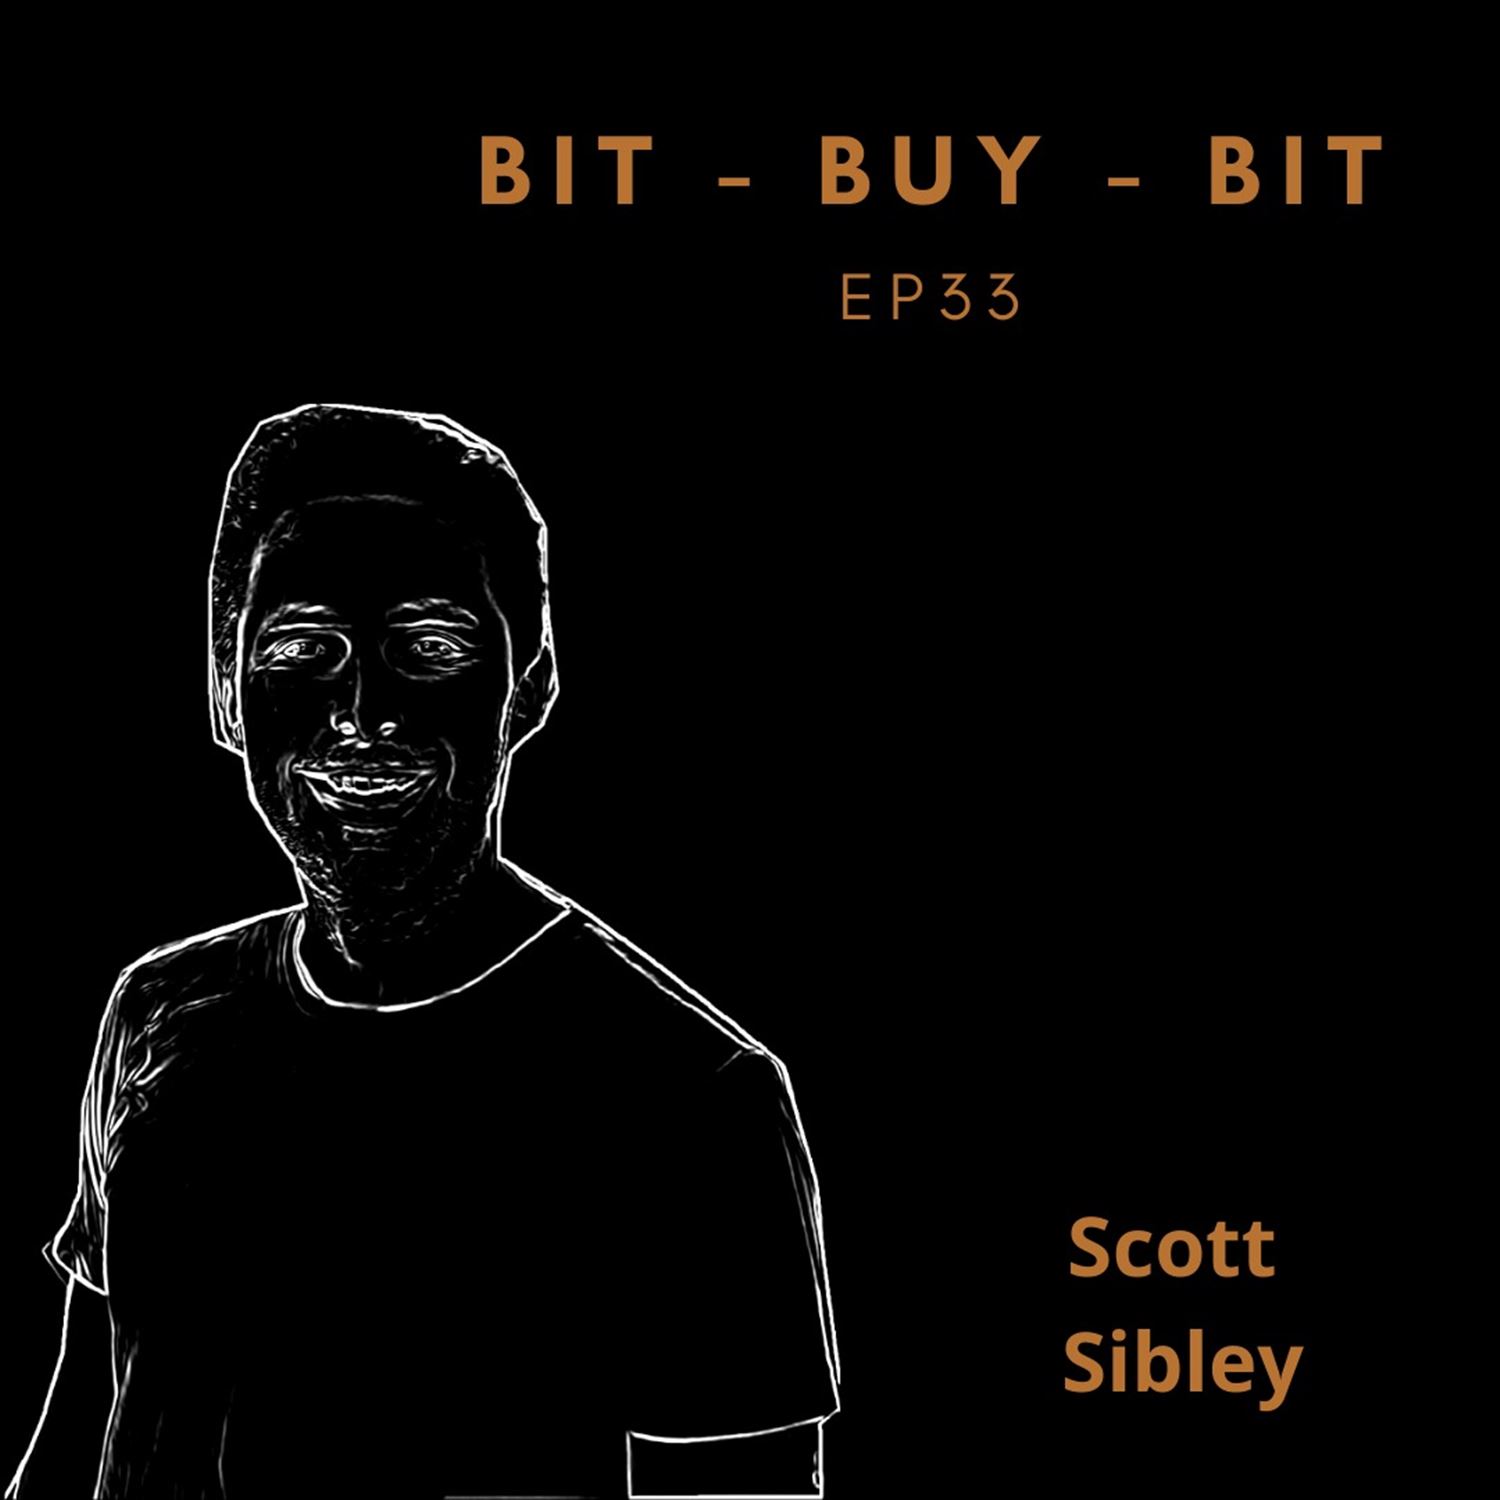 EP33 Bitcoin podcast with Scott Sibley.